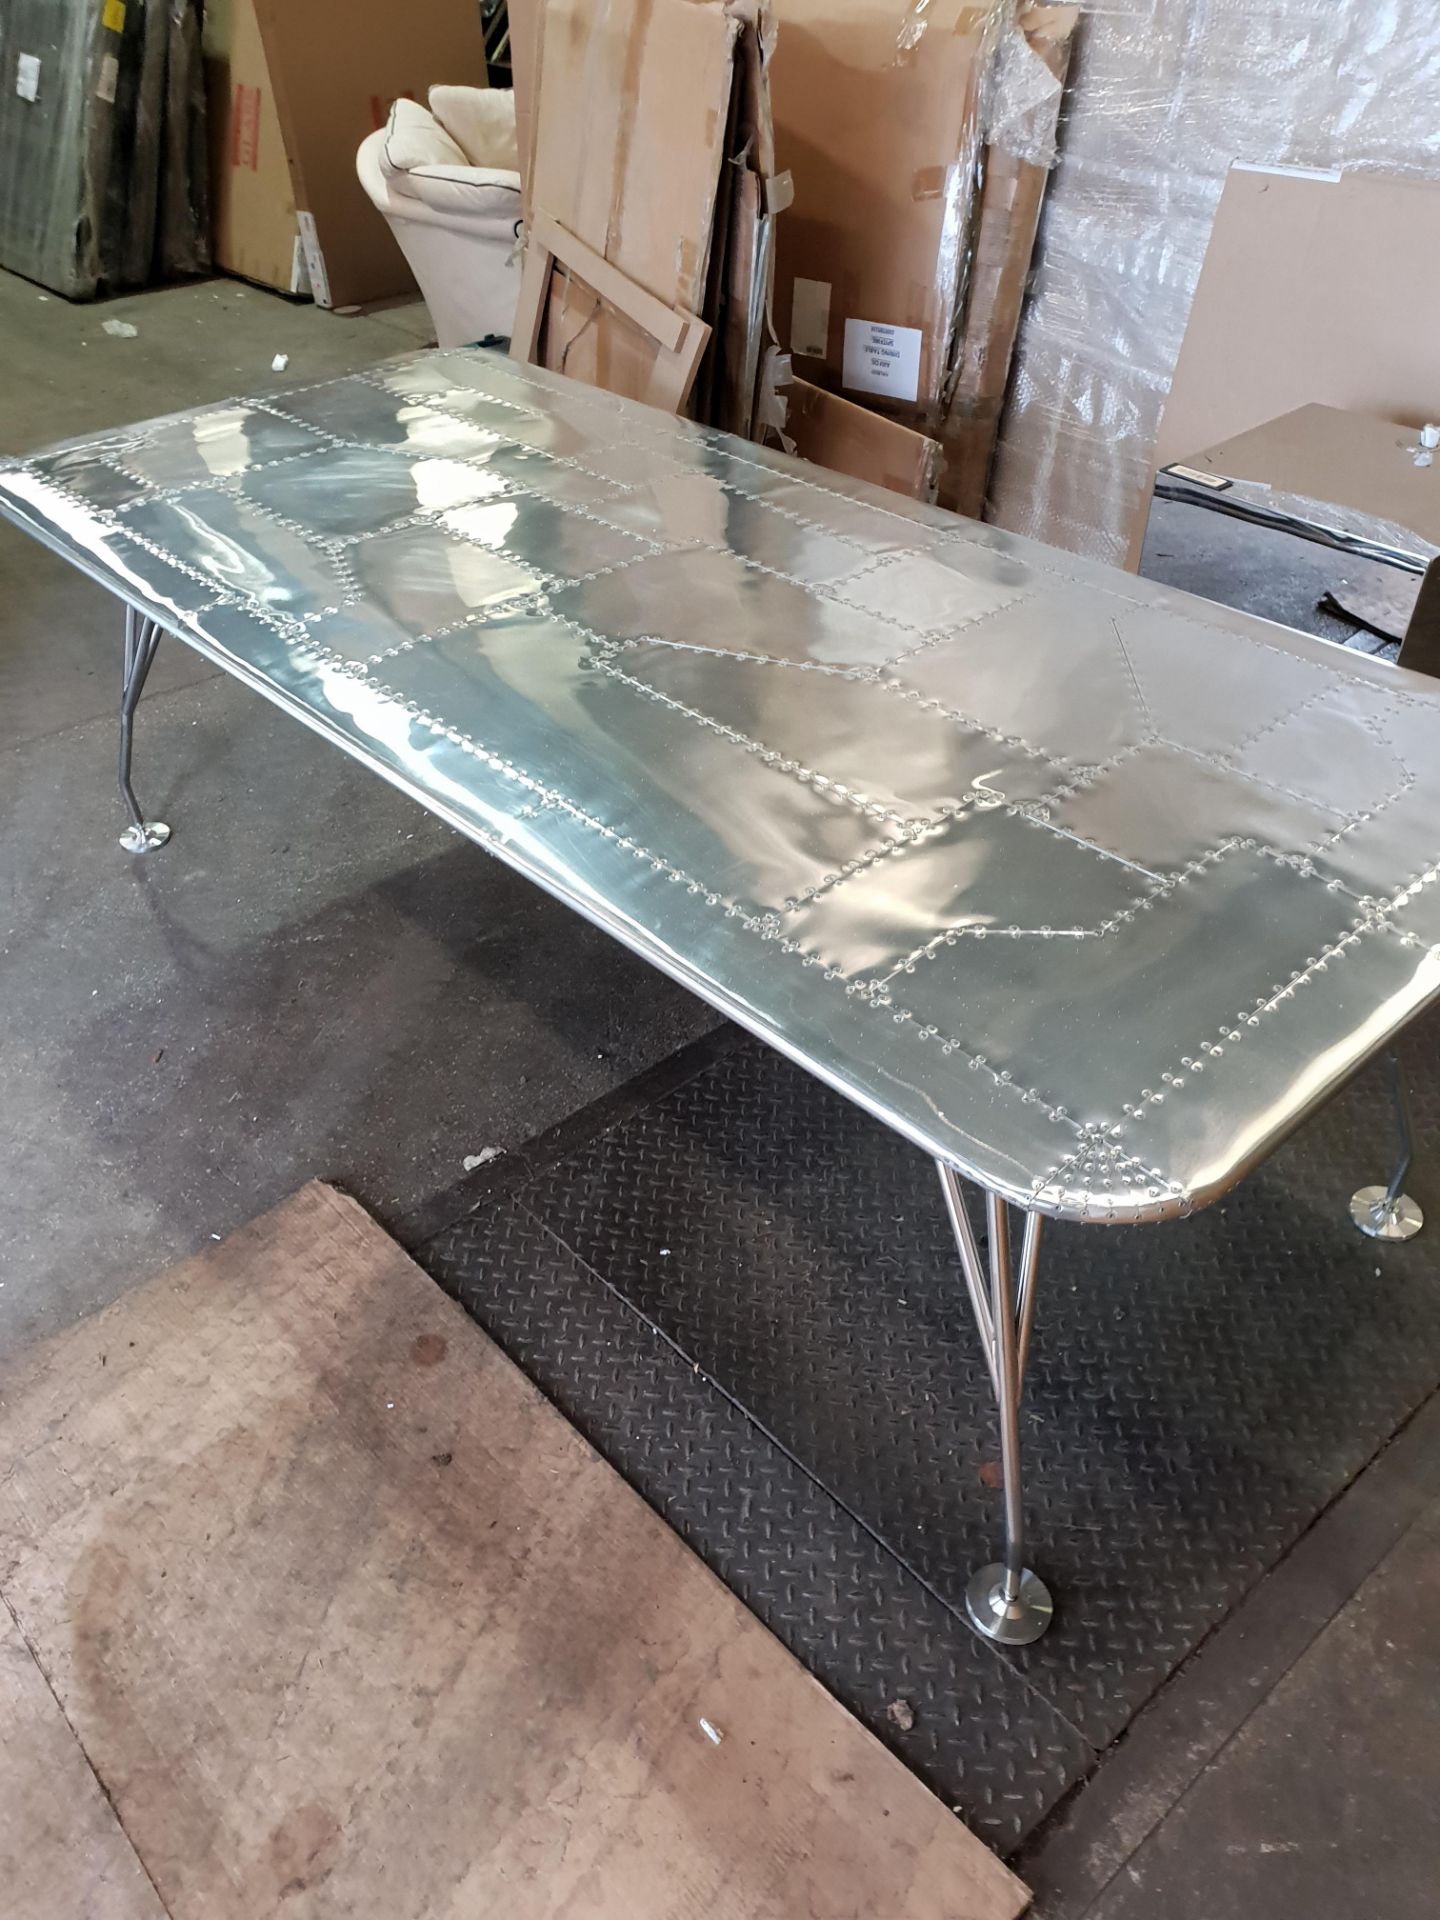 Airfoil Spitfire Dining Table The Airfoil Dining Table Hovers Over The Ground A Perfect Platform For - Image 3 of 4